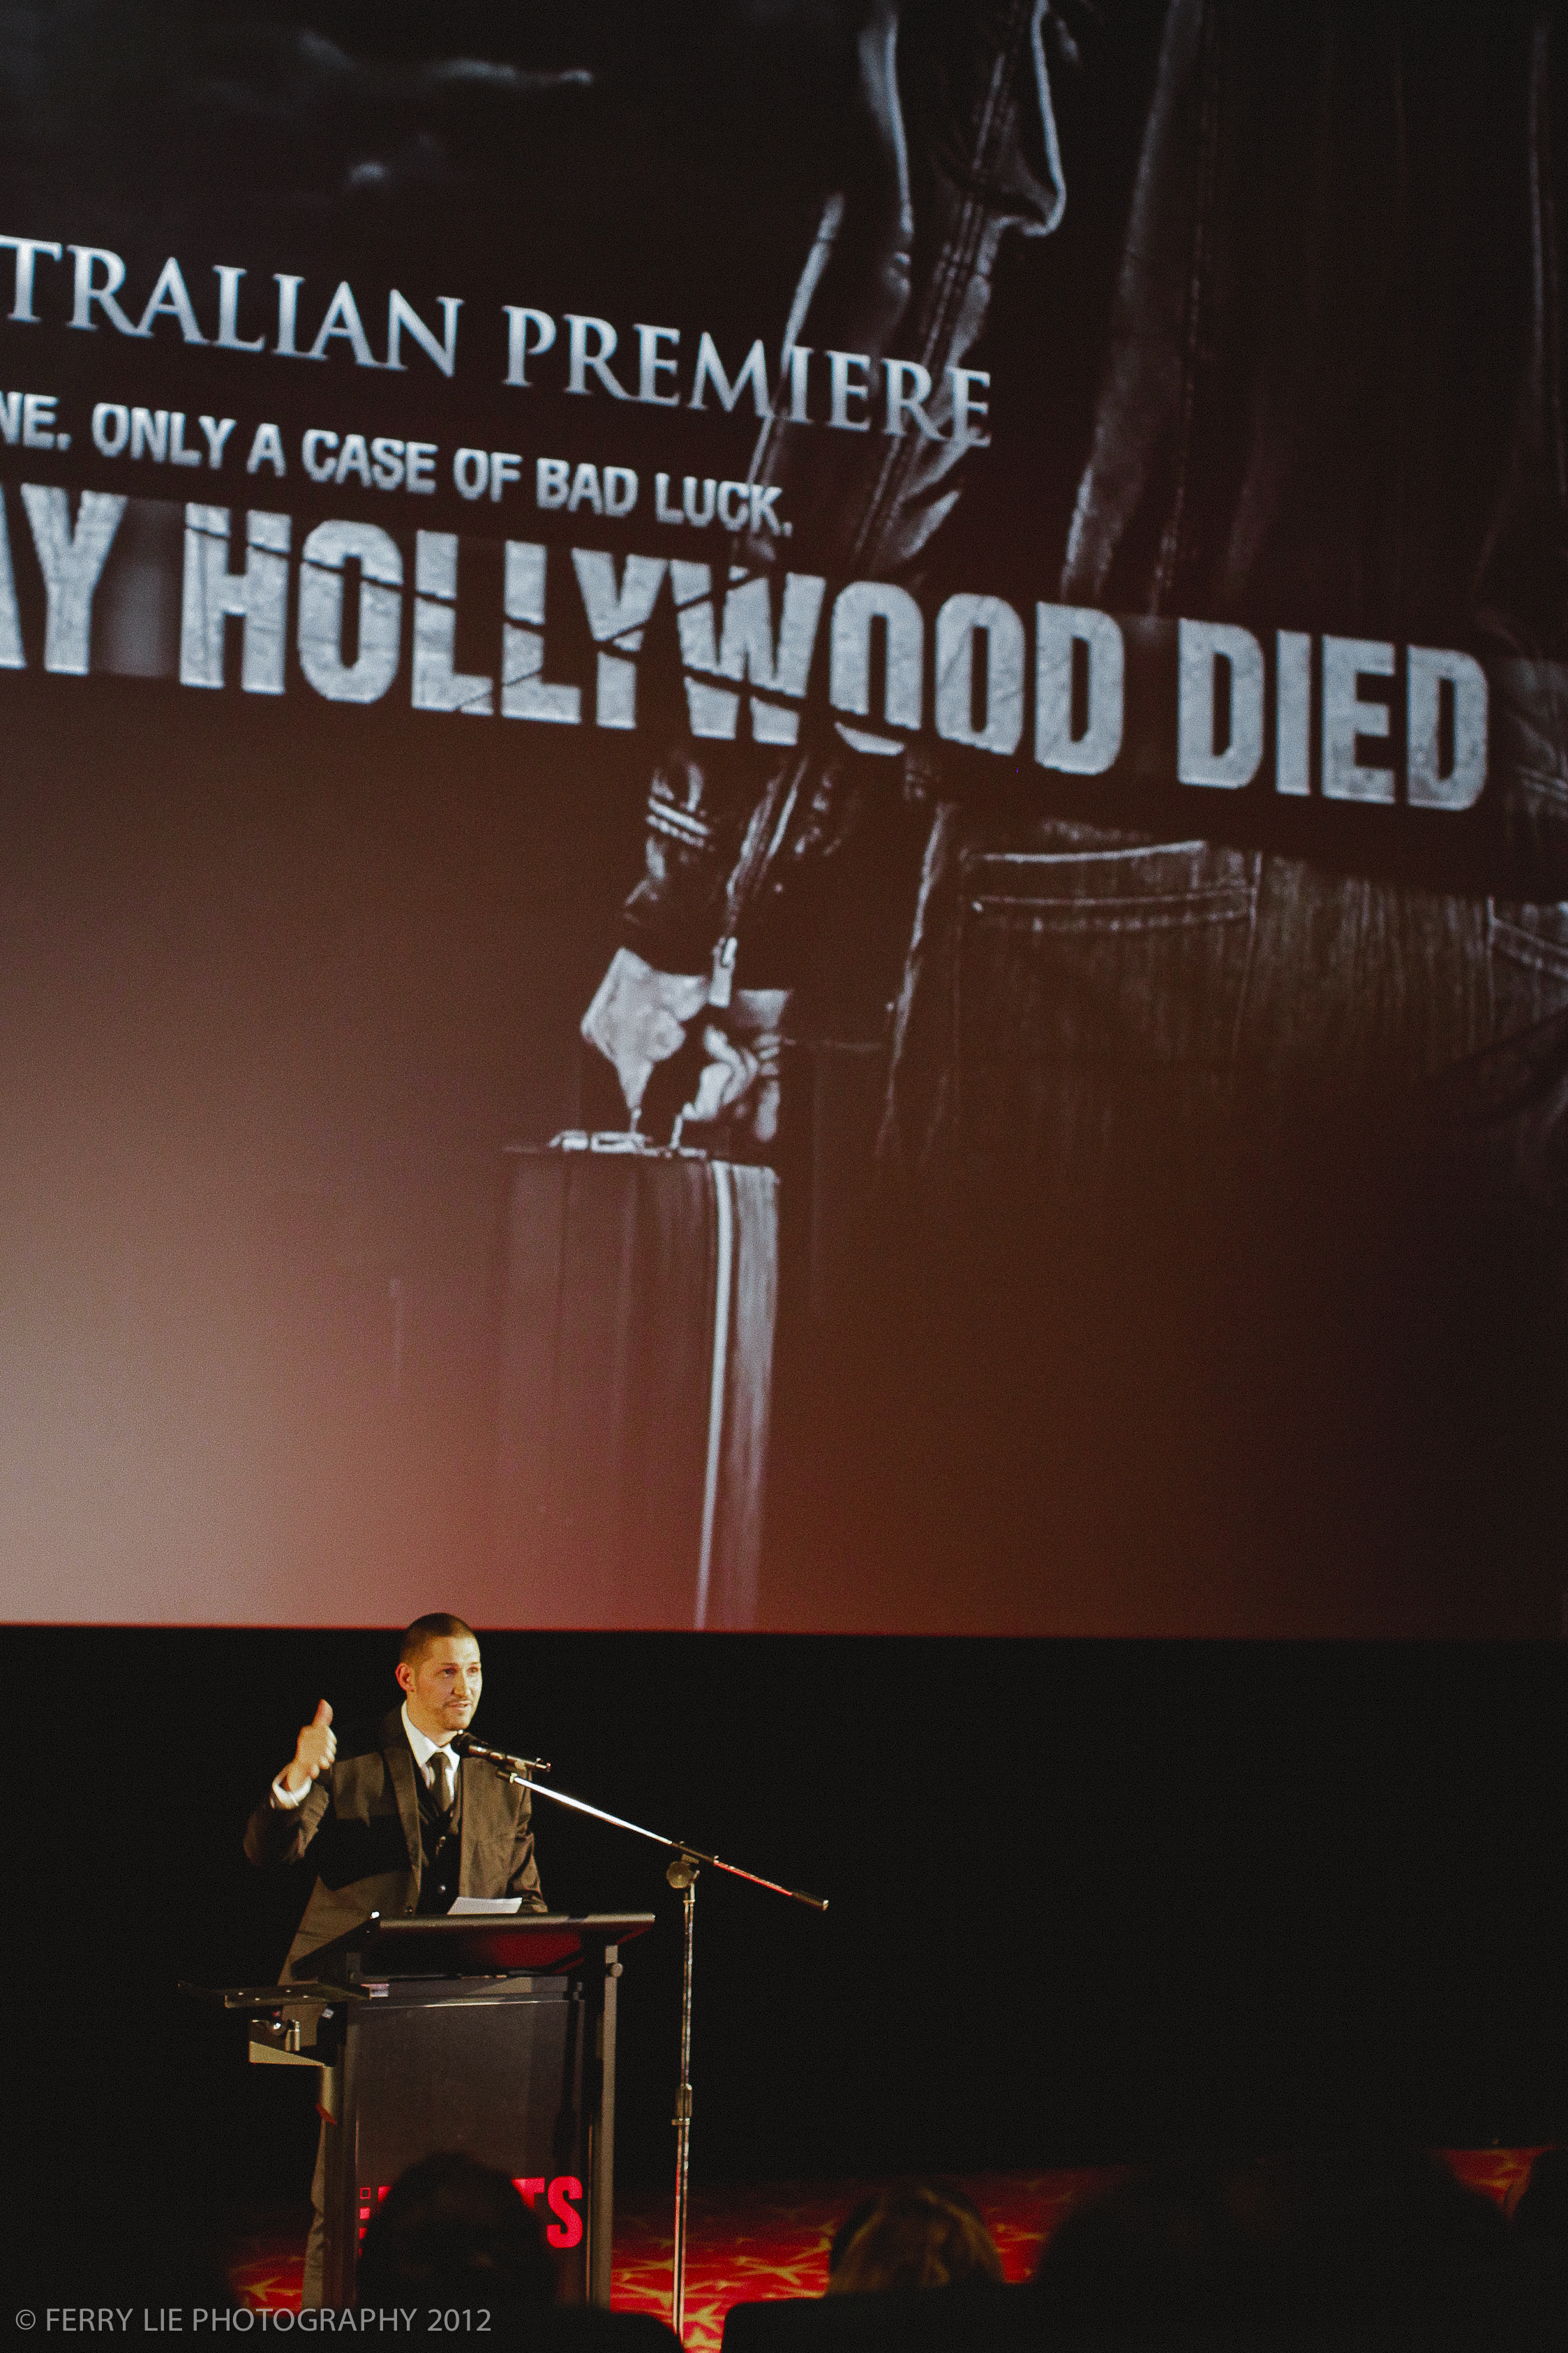 Managing Director and Producer @ Rising Pictures gives the thumbs up to commence the screening of The Day Hollywood Died